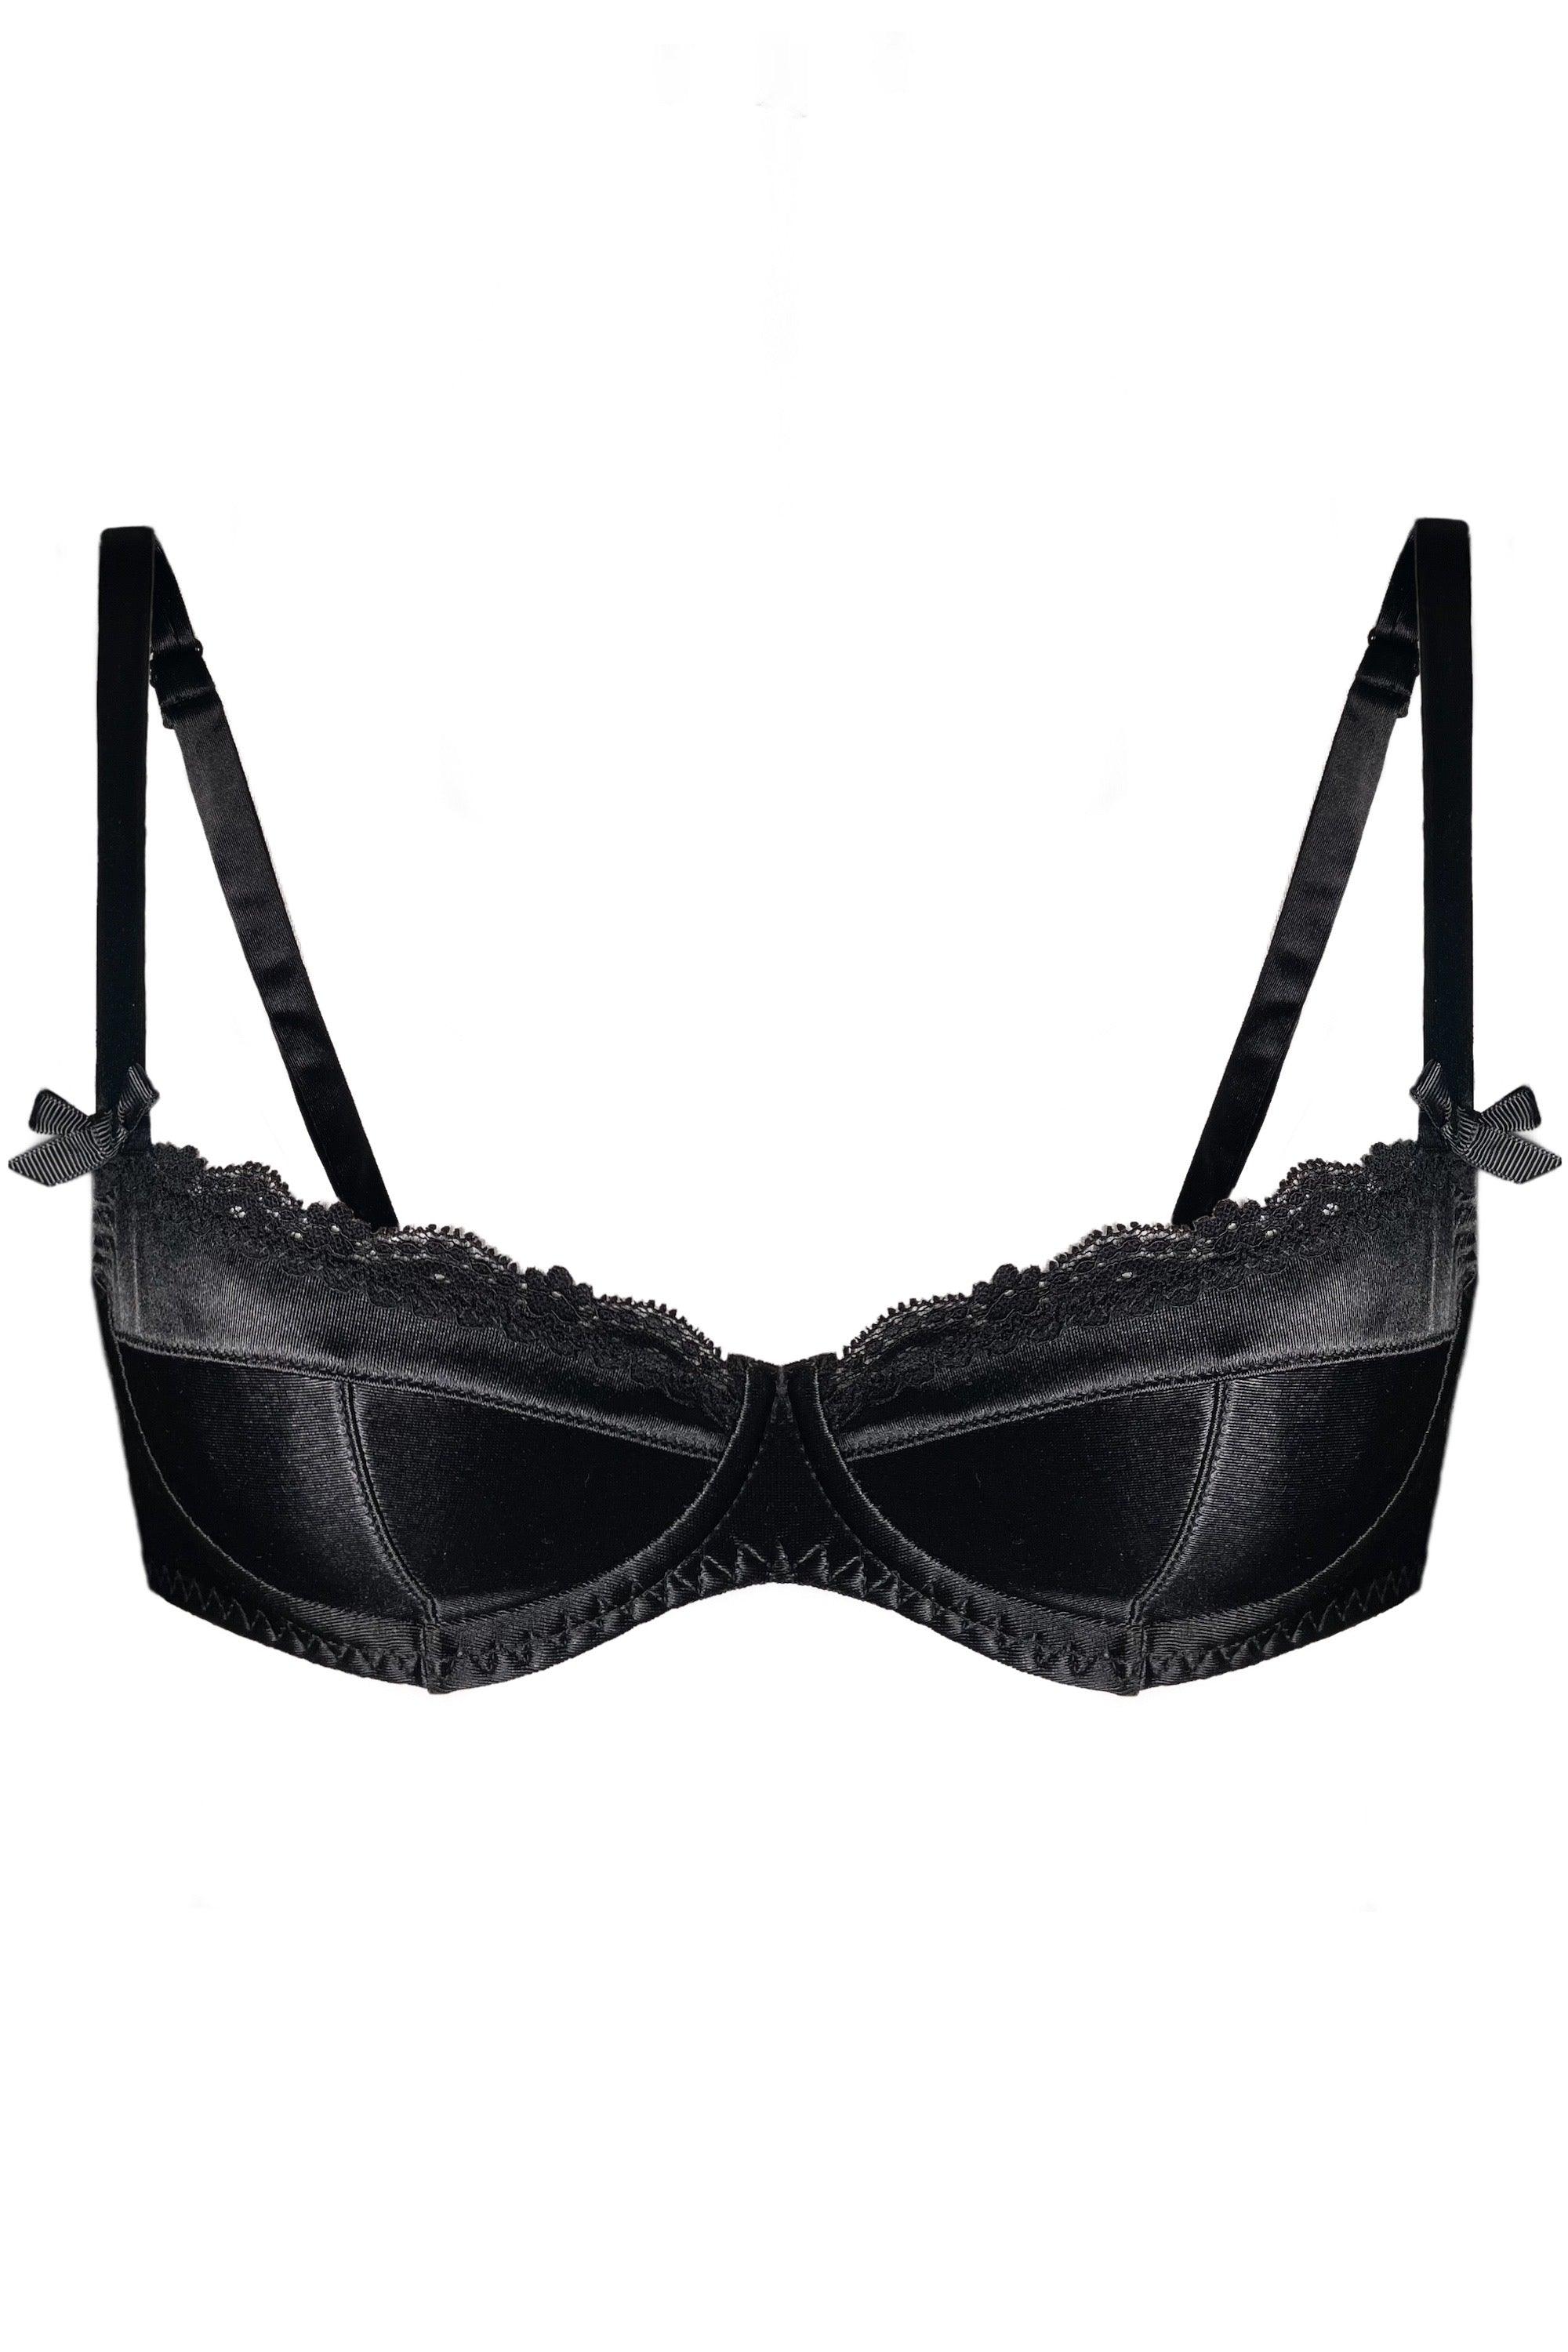 Otwoo Lingerie For Ladies Womens Sexy Bras Bowknot Underwired